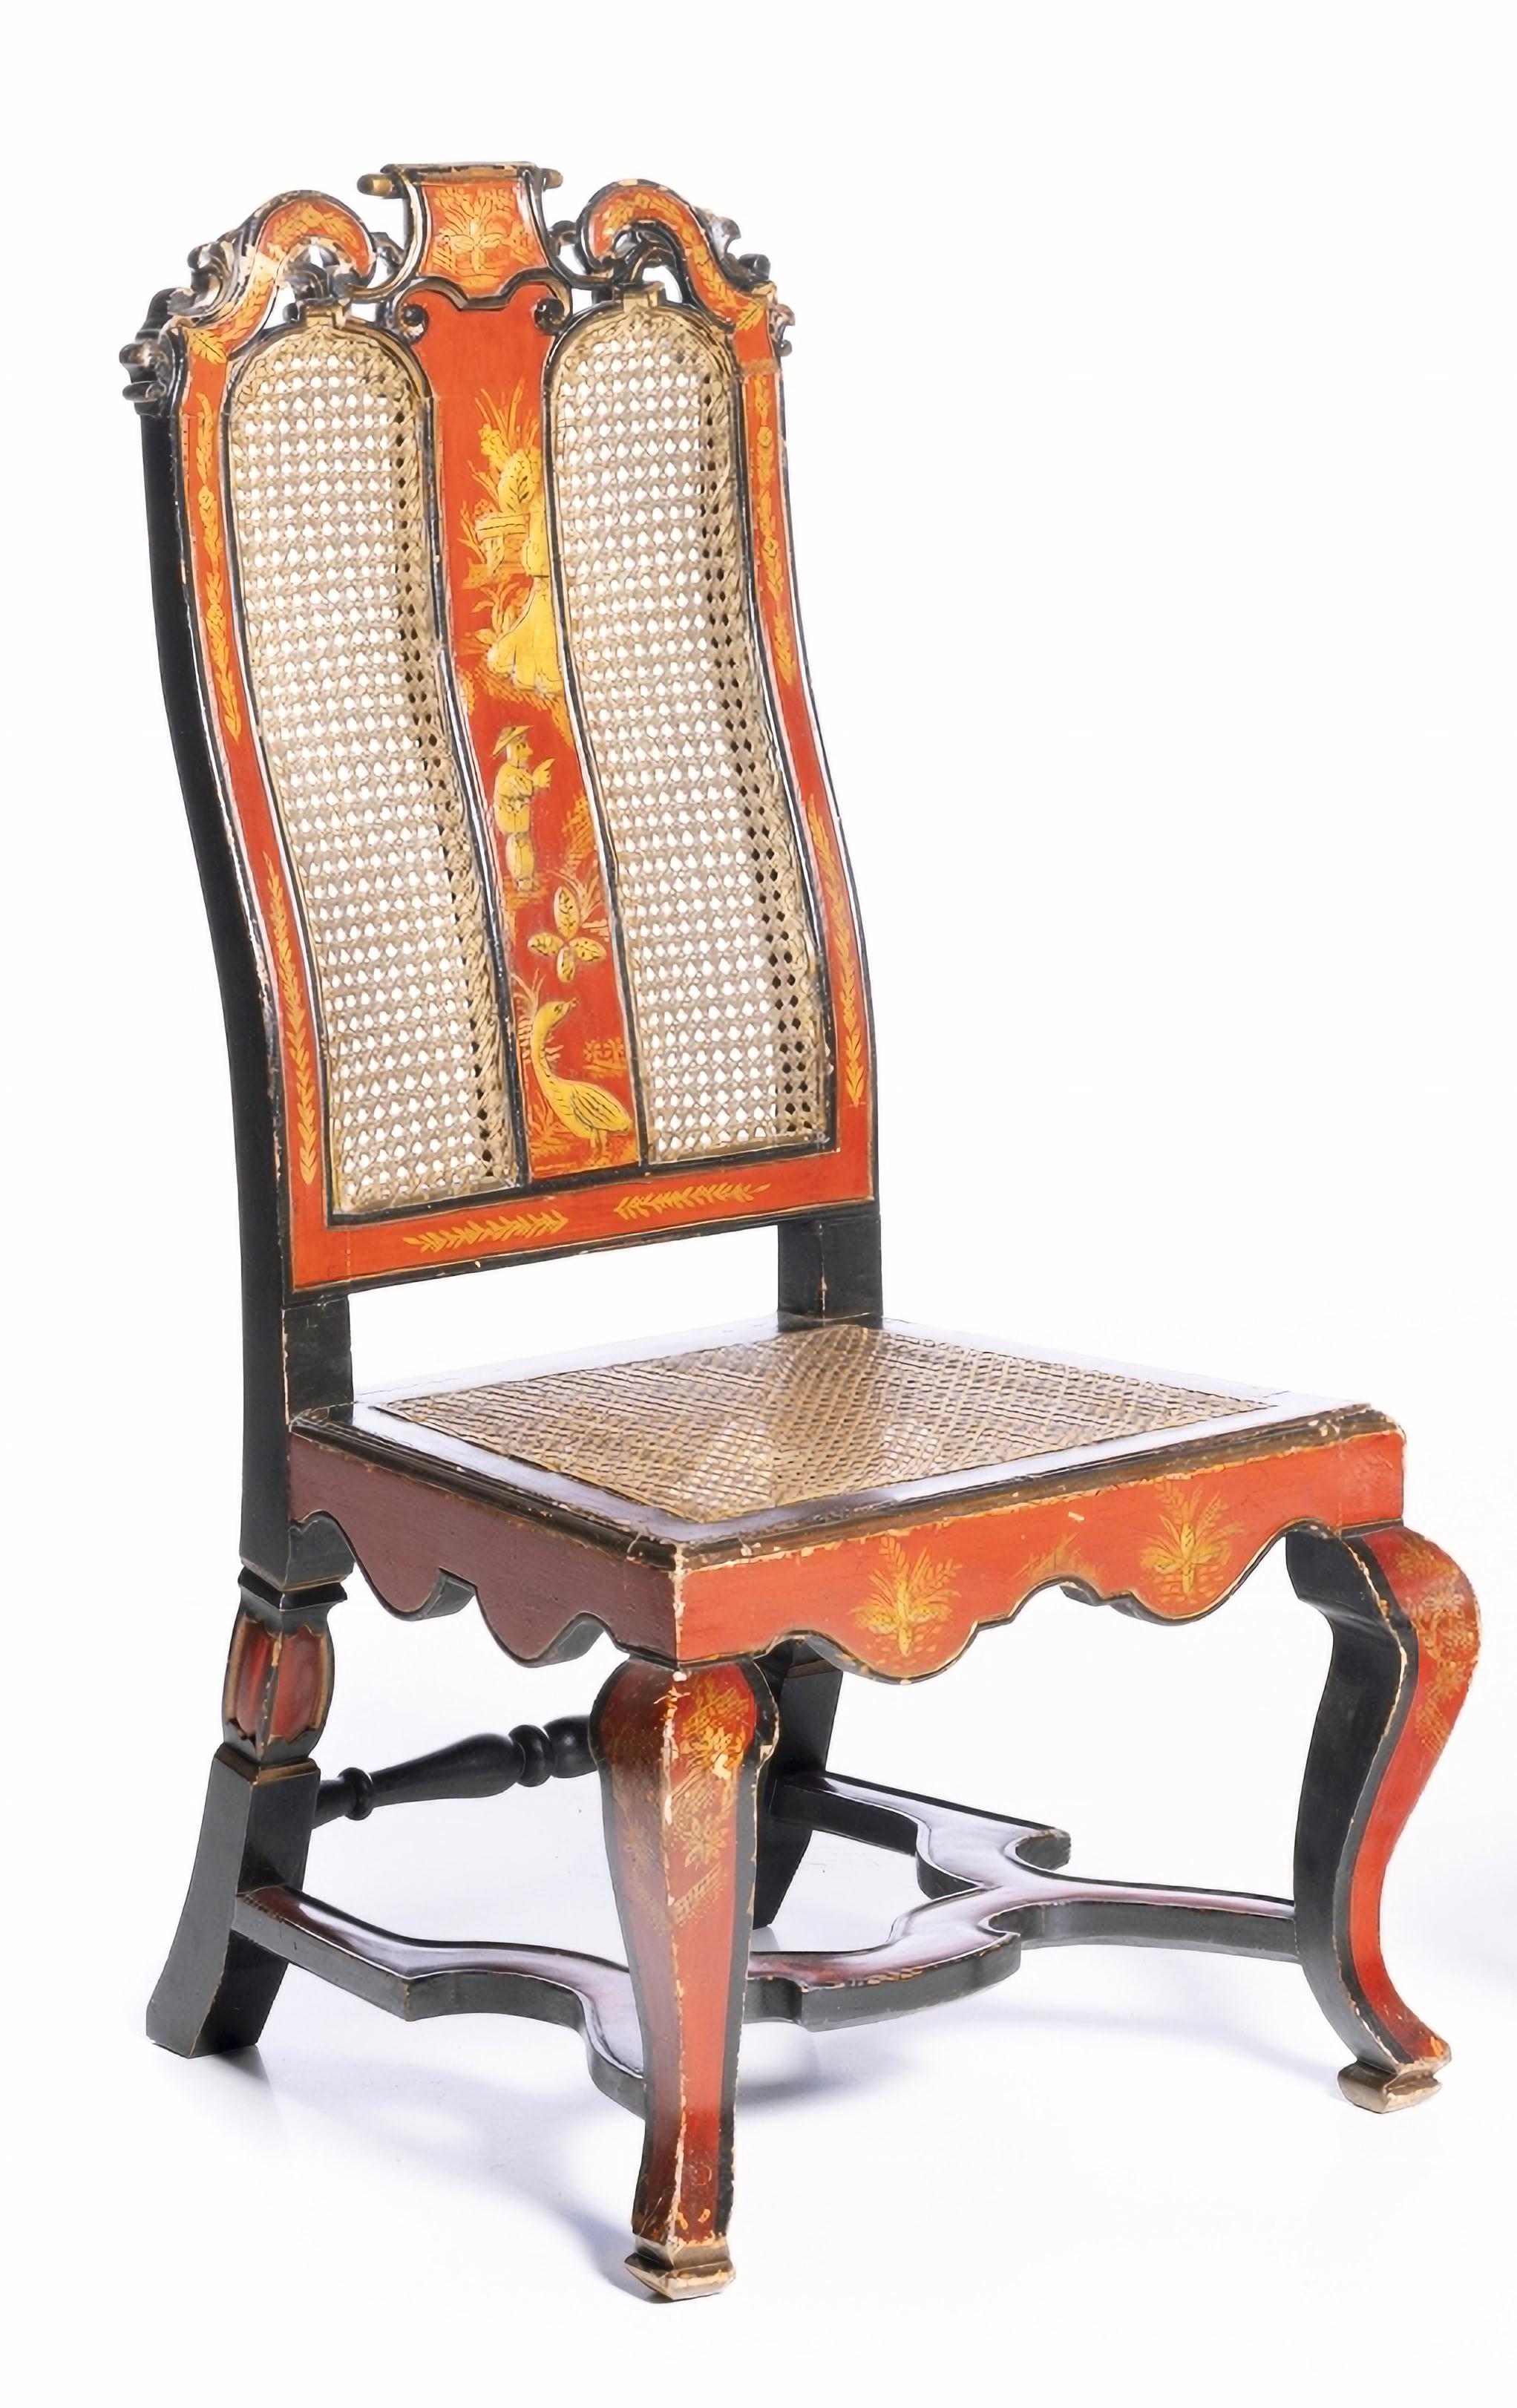 George II IMPORTANT PAIR OF JORGE II CHAIRS  From the 18th century For Sale